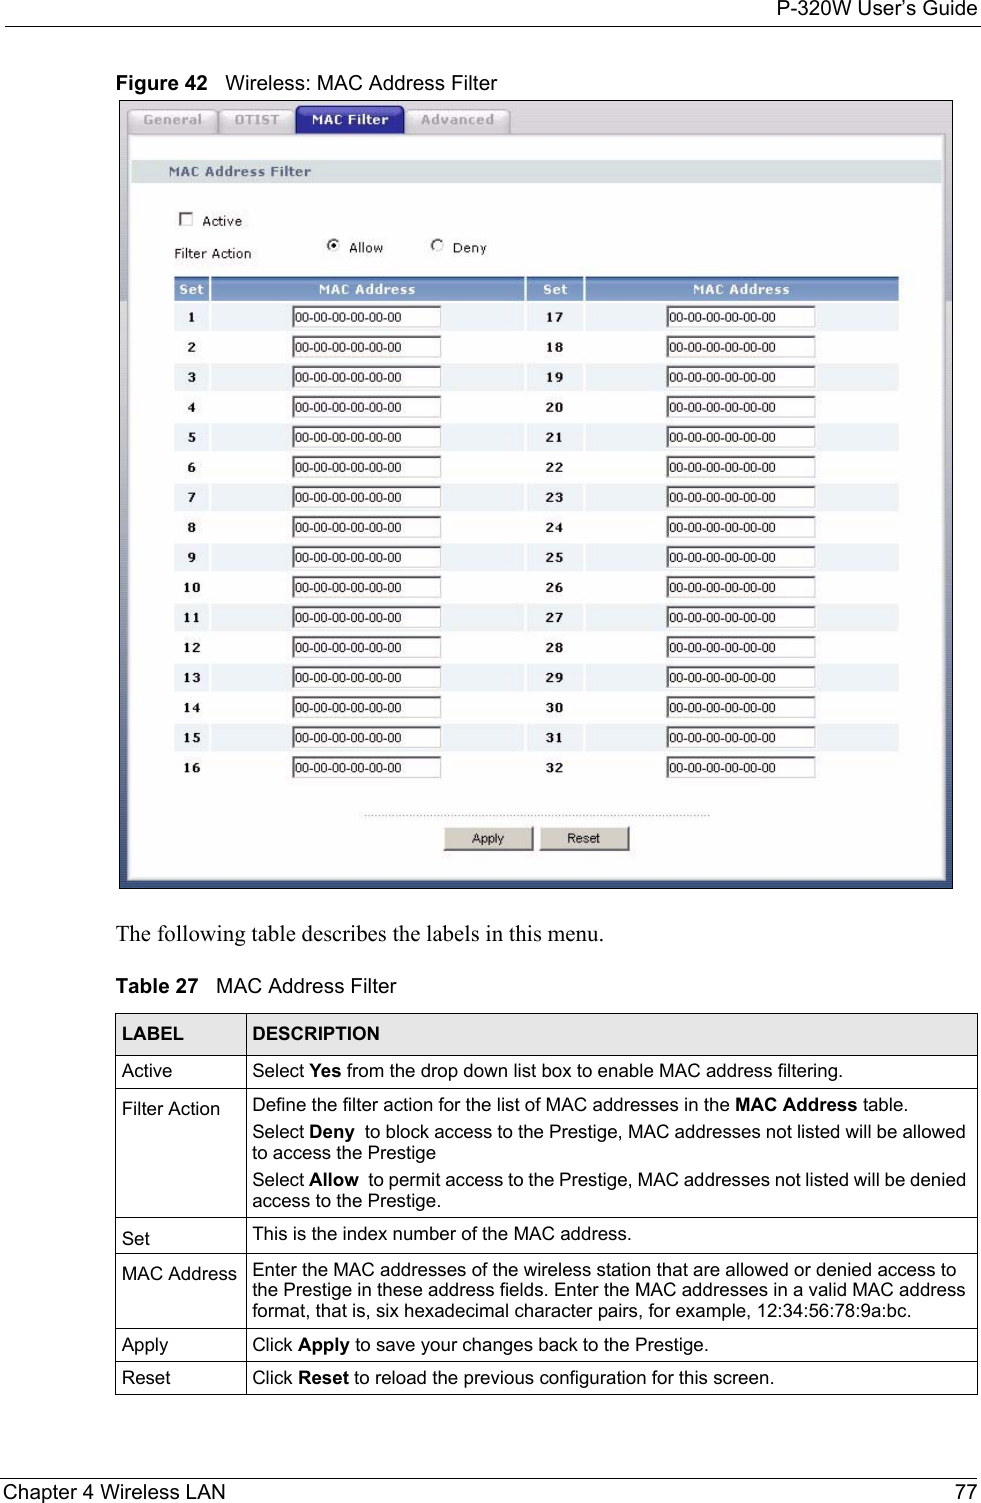 P-320W User’s GuideChapter 4 Wireless LAN 77Figure 42   Wireless: MAC Address FilterThe following table describes the labels in this menu.Table 27   MAC Address FilterLABEL DESCRIPTIONActive Select Yes from the drop down list box to enable MAC address filtering.Filter Action  Define the filter action for the list of MAC addresses in the MAC Address table. Select Deny  to block access to the Prestige, MAC addresses not listed will be allowed to access the Prestige Select Allow  to permit access to the Prestige, MAC addresses not listed will be denied access to the Prestige. Set This is the index number of the MAC address.MAC Address Enter the MAC addresses of the wireless station that are allowed or denied access to the Prestige in these address fields. Enter the MAC addresses in a valid MAC address format, that is, six hexadecimal character pairs, for example, 12:34:56:78:9a:bc.Apply Click Apply to save your changes back to the Prestige.Reset Click Reset to reload the previous configuration for this screen.